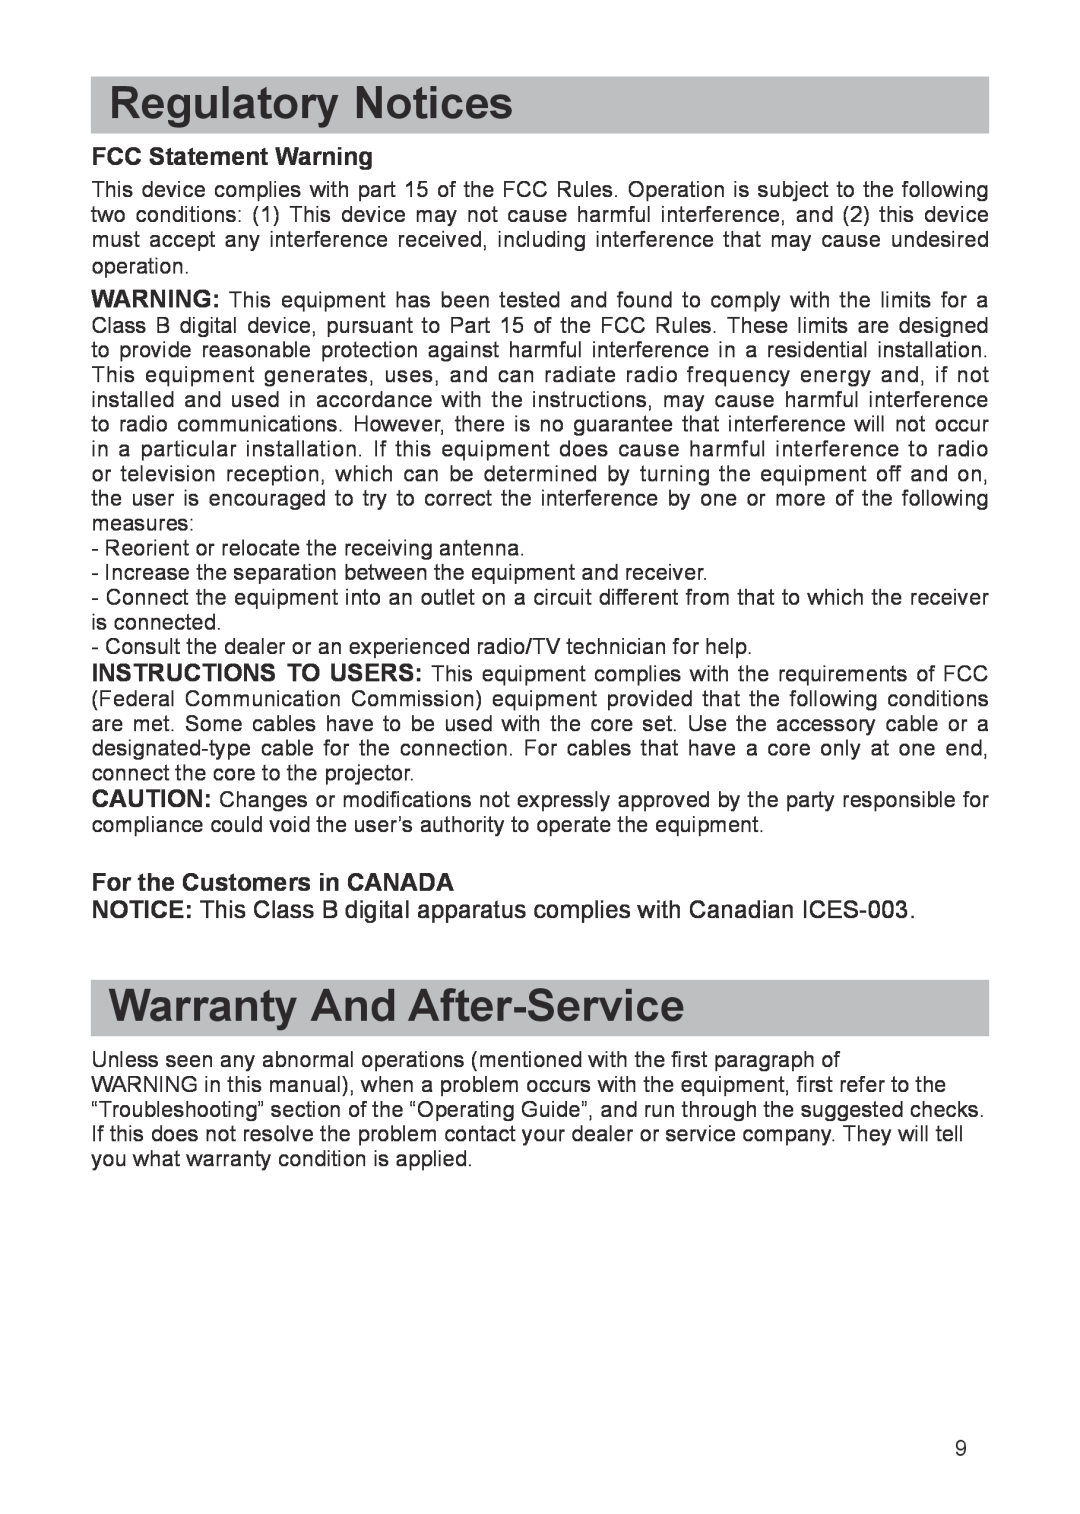 Dukane 8763 user manual Regulatory Notices, Warranty And After-Service, FCC Statement Warning, For the Customers in CANADA 